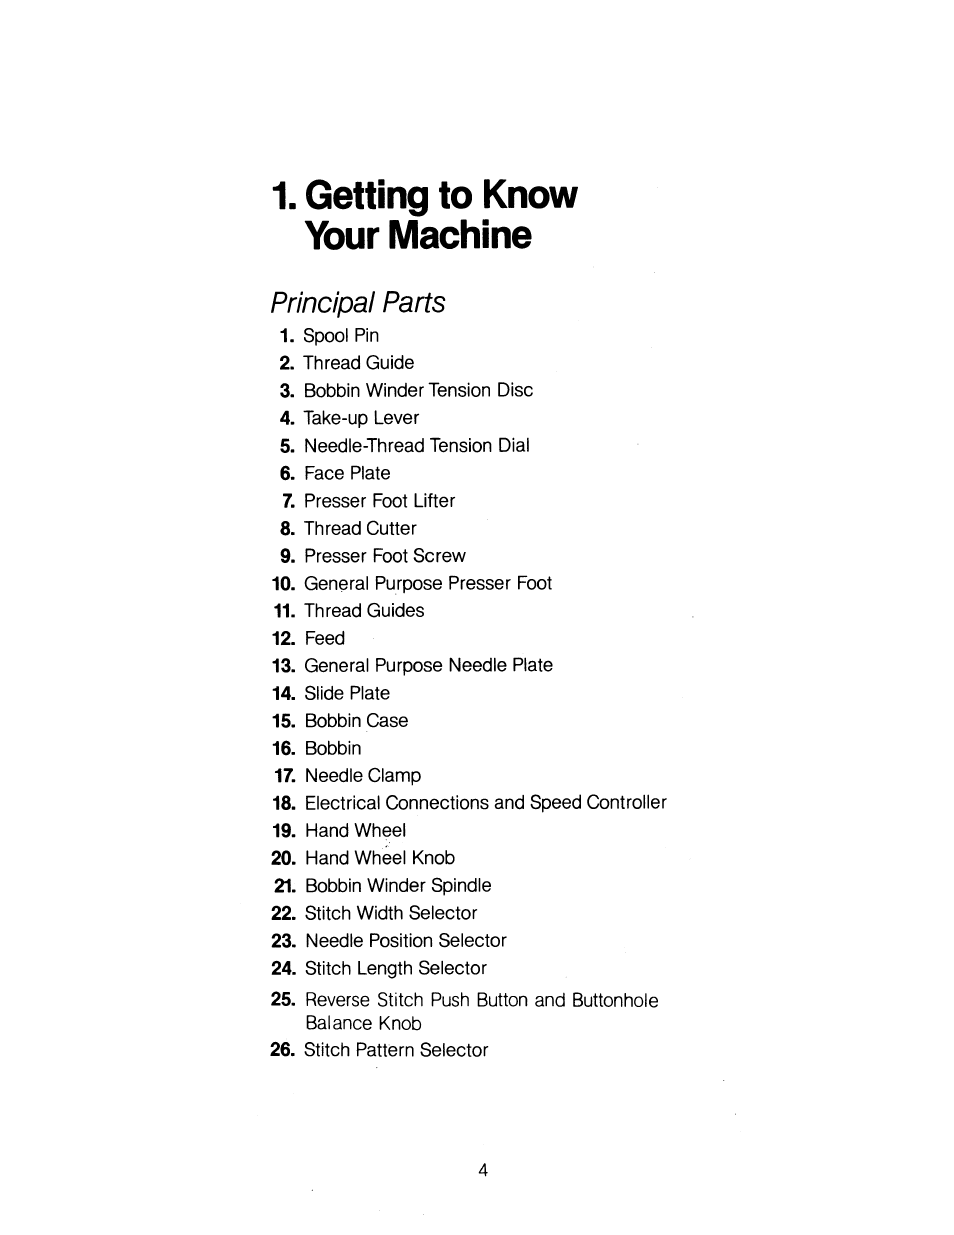 Getting to know your machine, Principal parts | SINGER 1263 User Manual